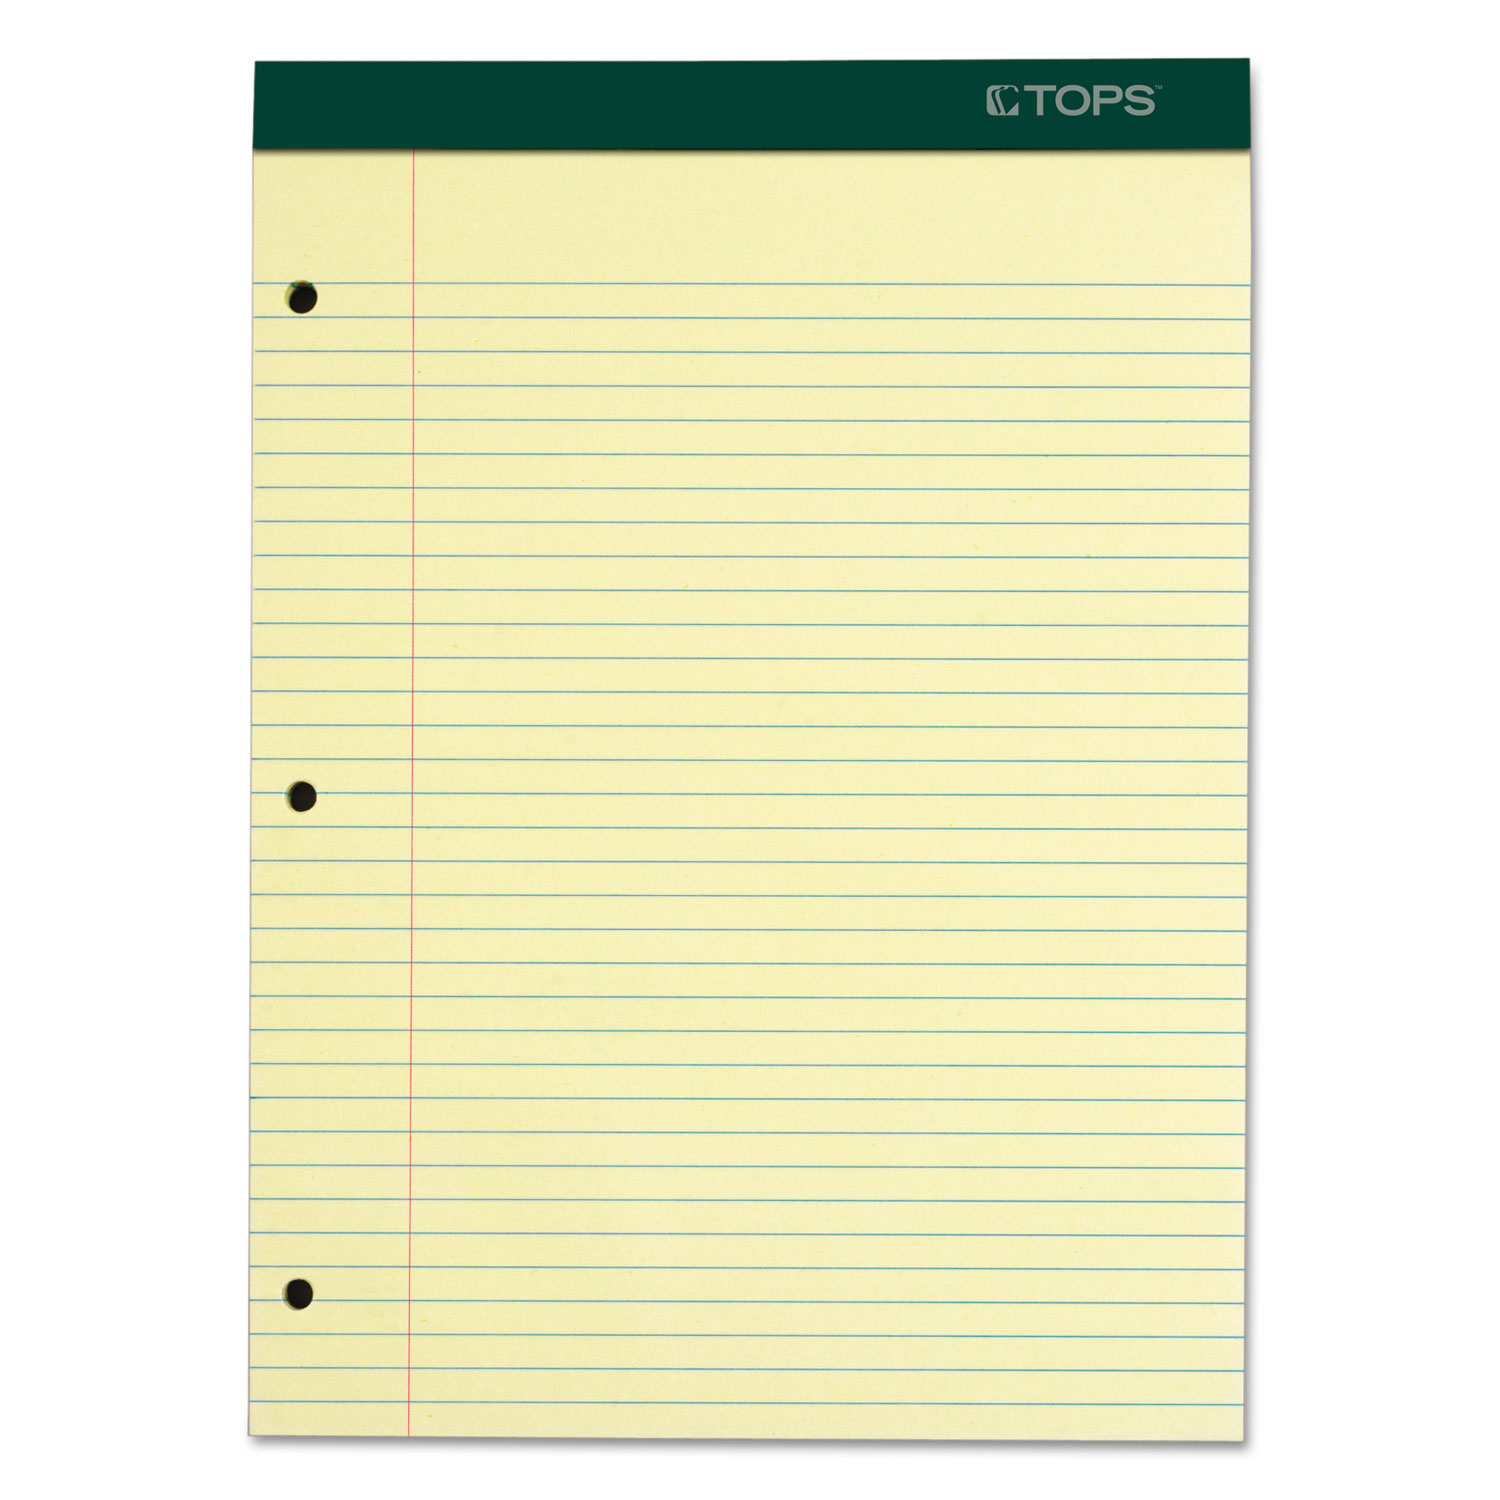  TOPS 63383 Double Docket Ruled Pads, Medium/College Rule, 8.5 x 11.75, Canary, 100 Sheets (TOP63383) 